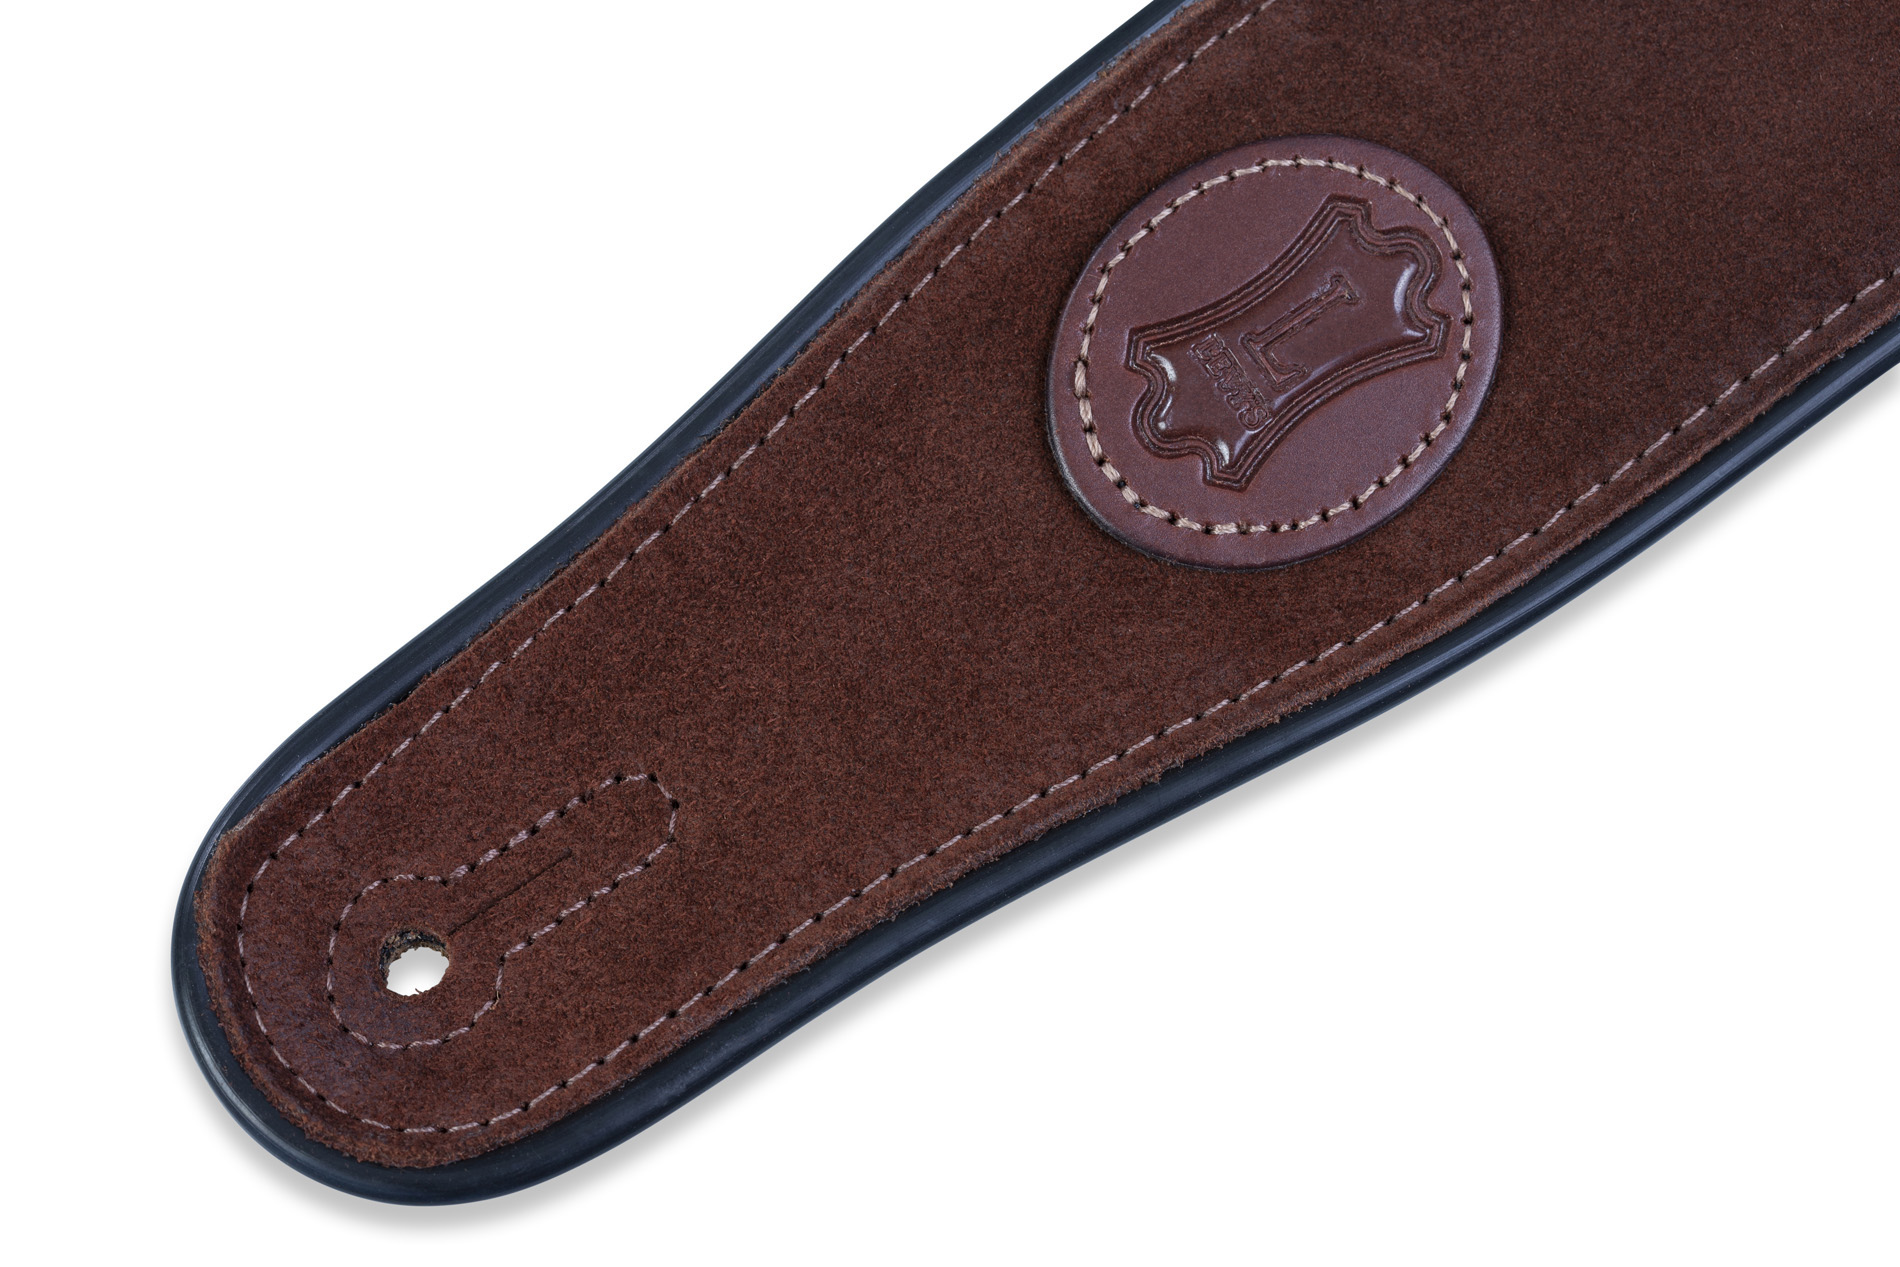 Levy's Suede Leather Sangle Daim Mss3 Brown - Correa - Variation 2